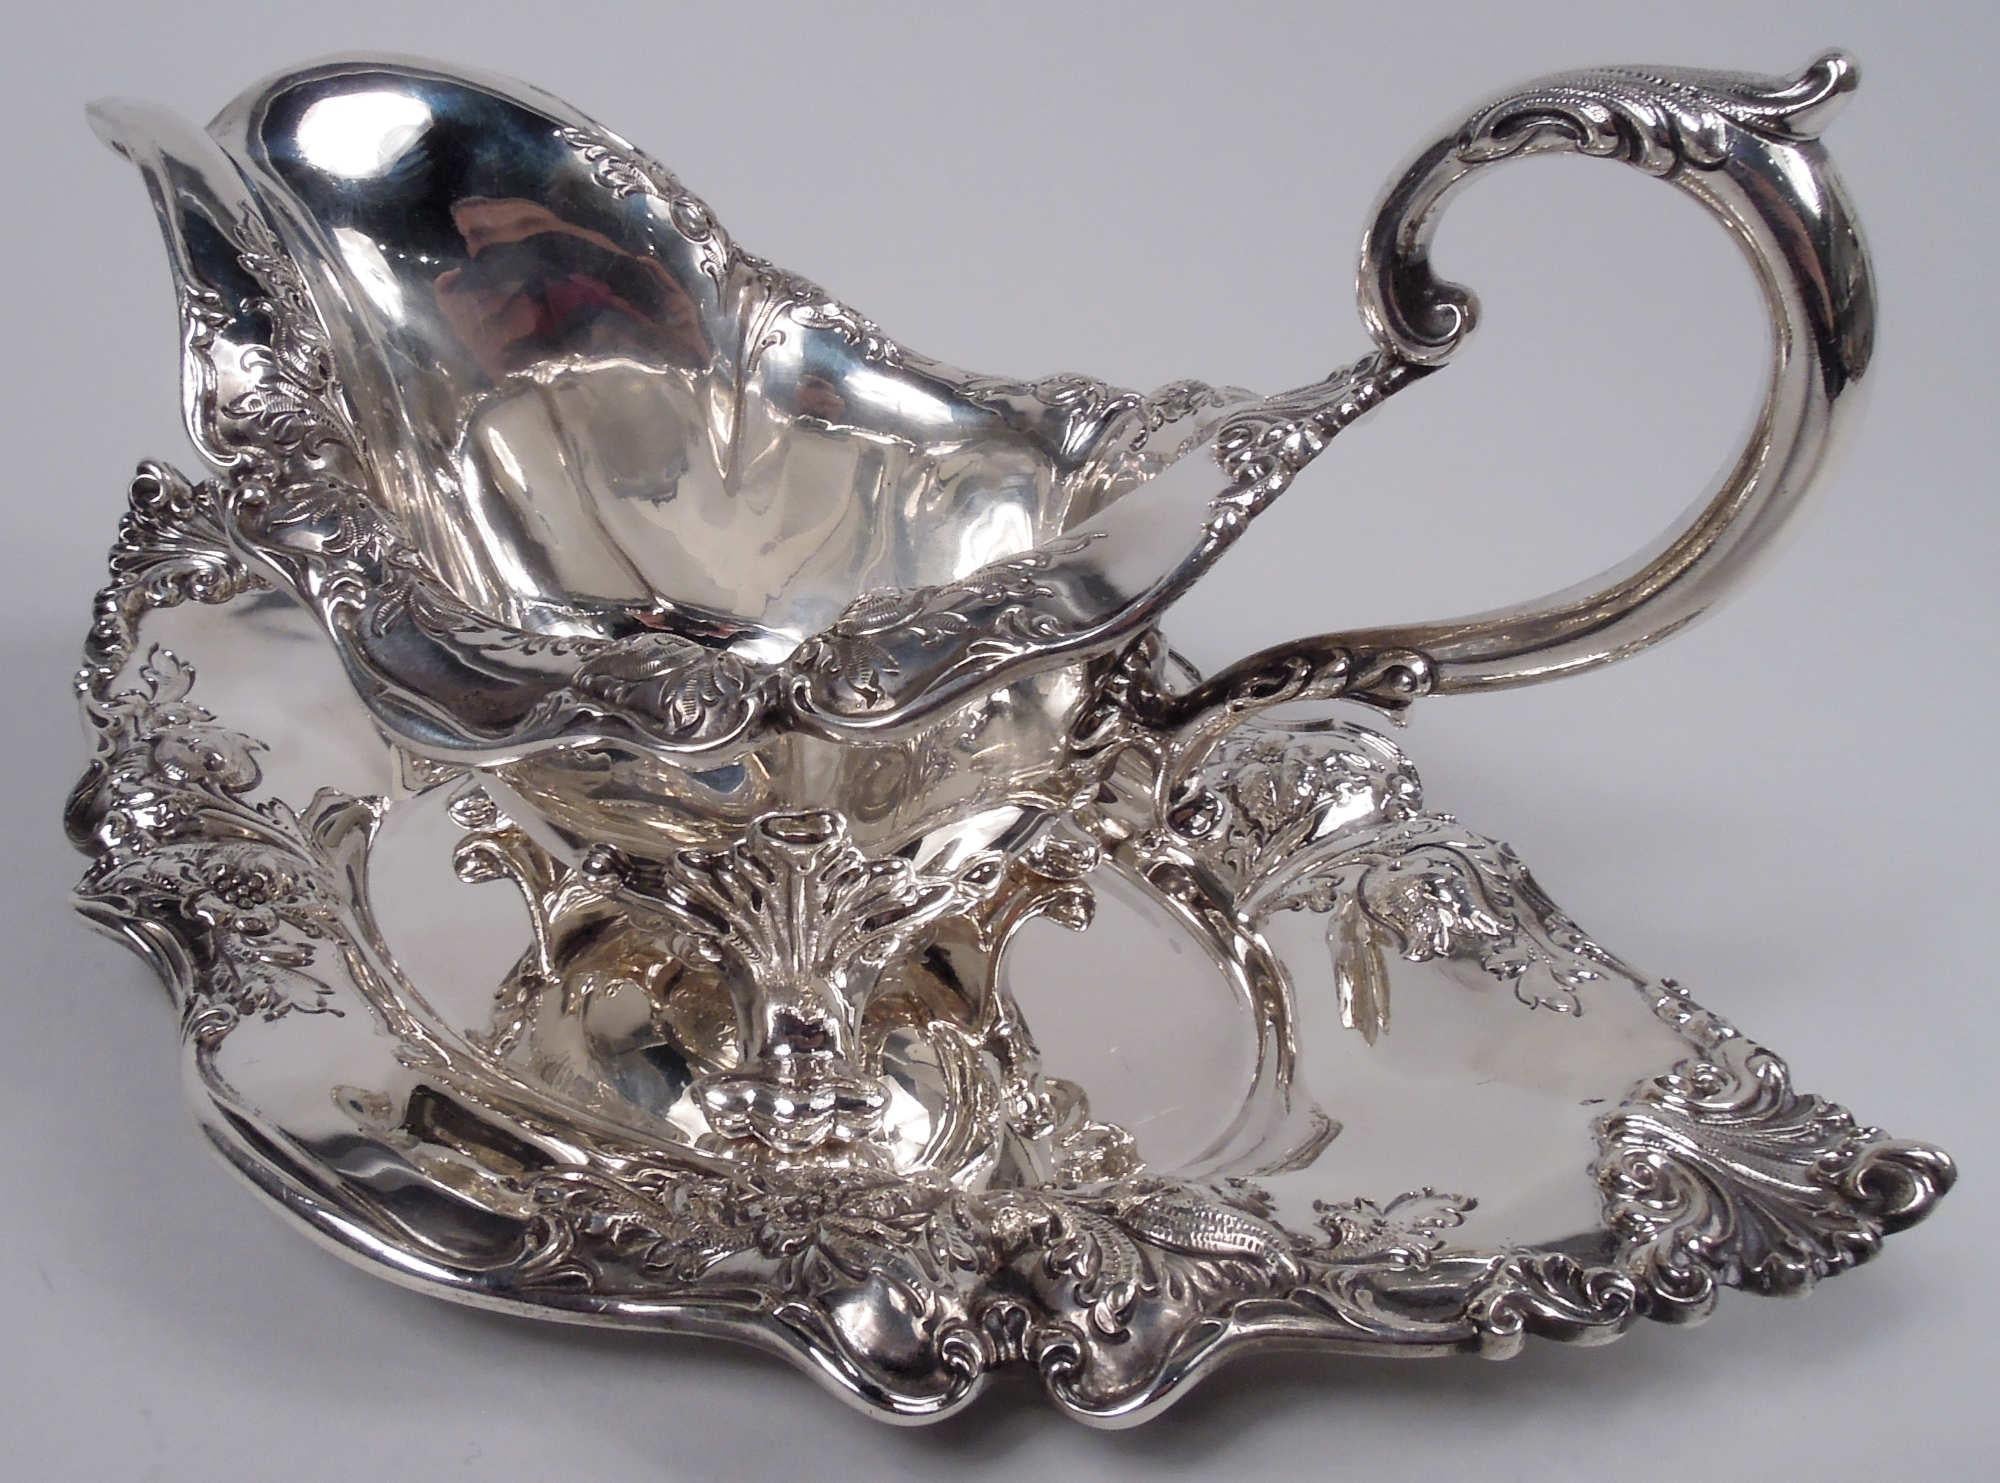 Early 20th Century Antique Dominick & Haff Edwardian Sterling Silver Gravy Boat on Stand For Sale